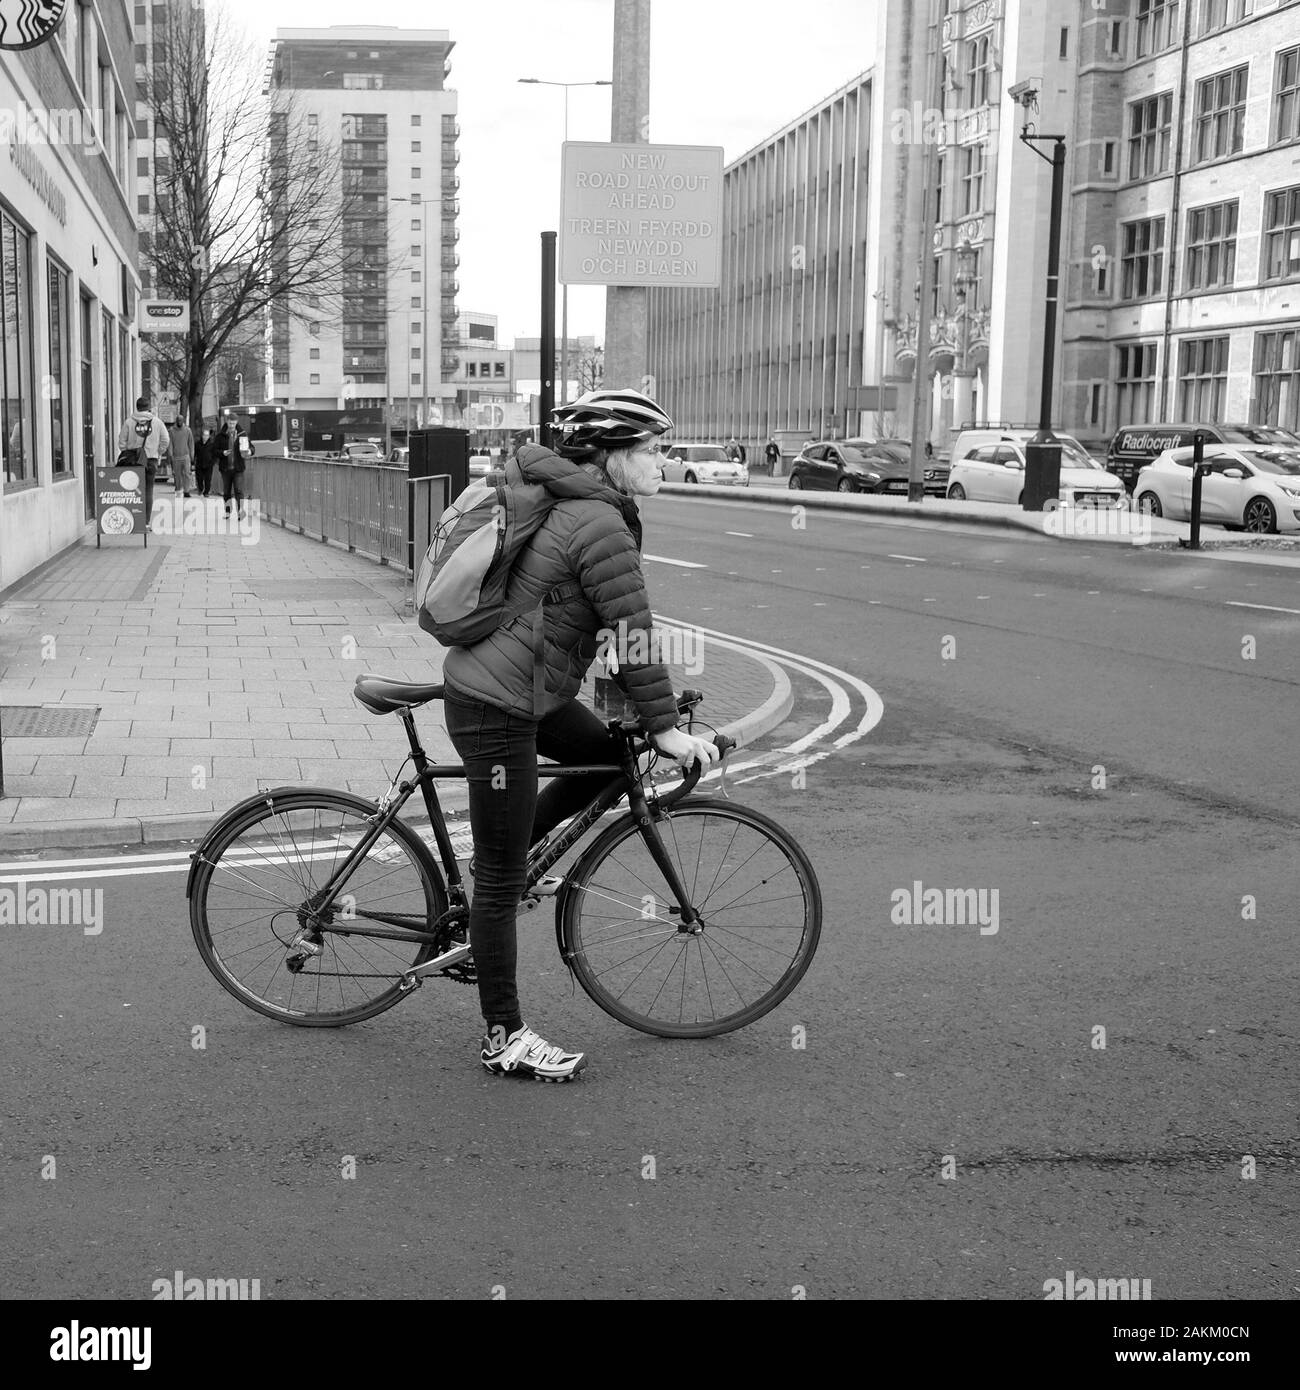 October 2019 - Cycle commuter on their bike at a traffic junction in Cardiff Stock Photo